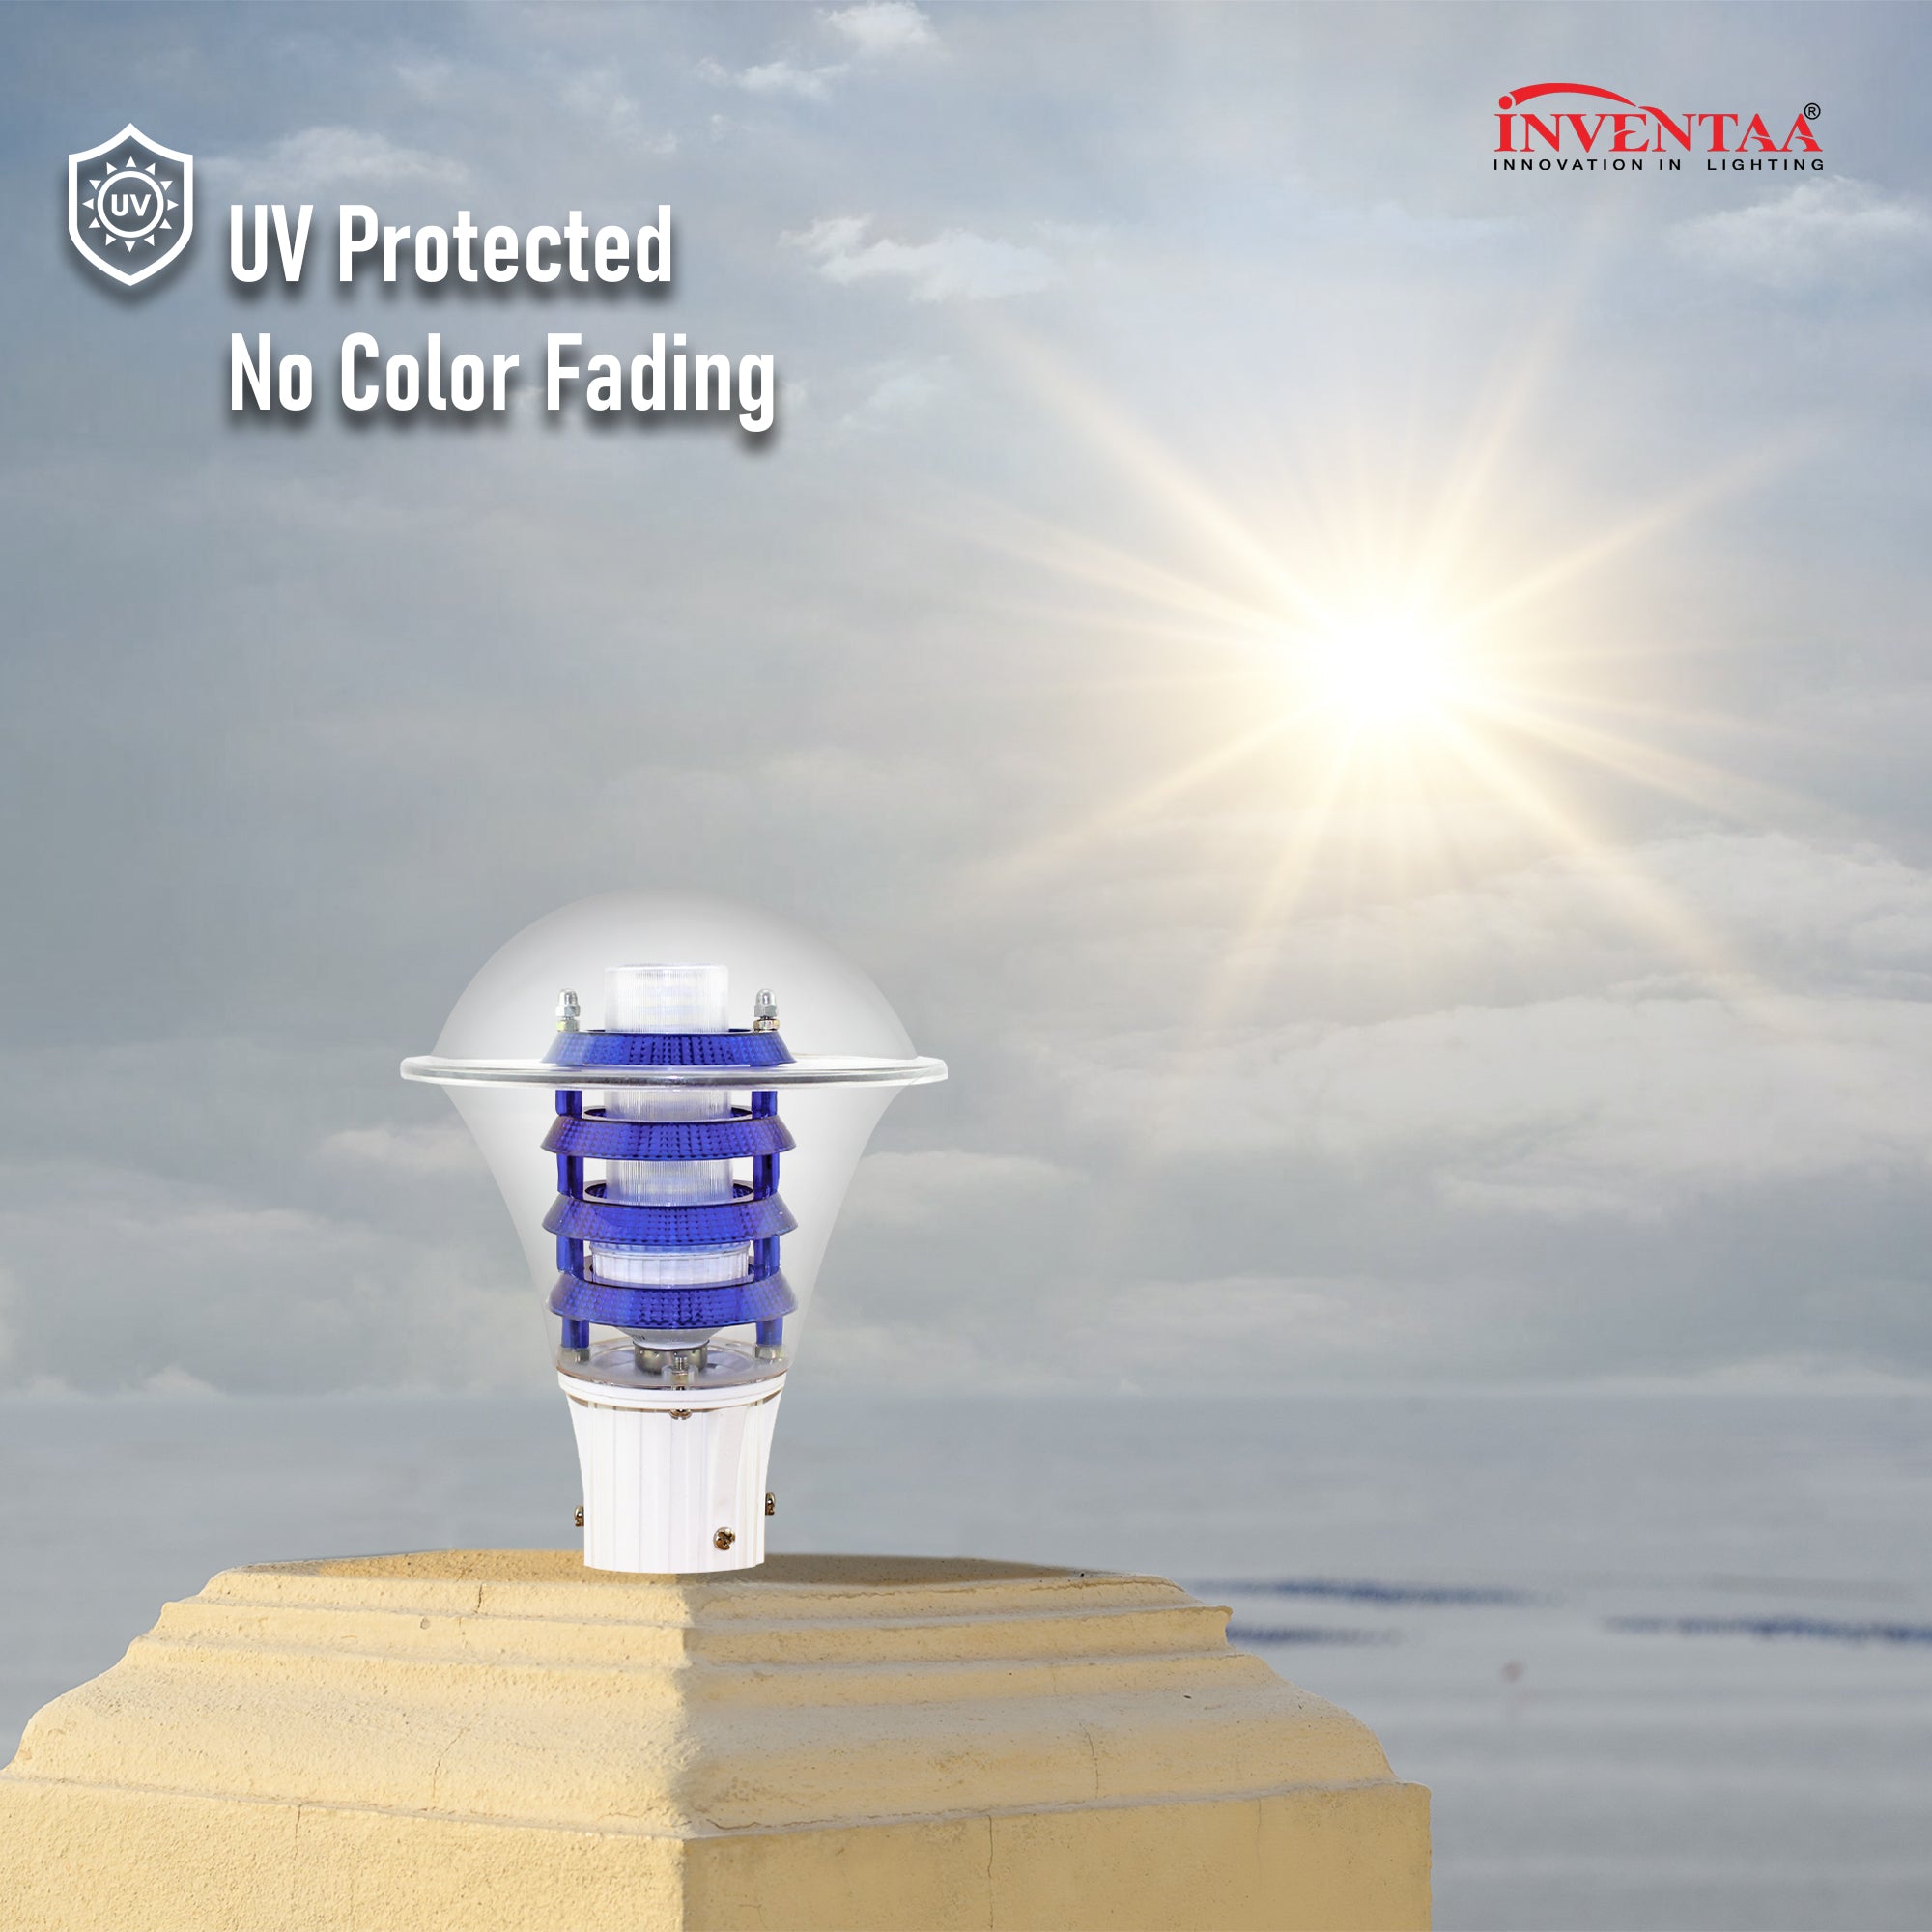 UV protected and no color fading Viva pc led gate light with warm white led bulb #bulb options_warm